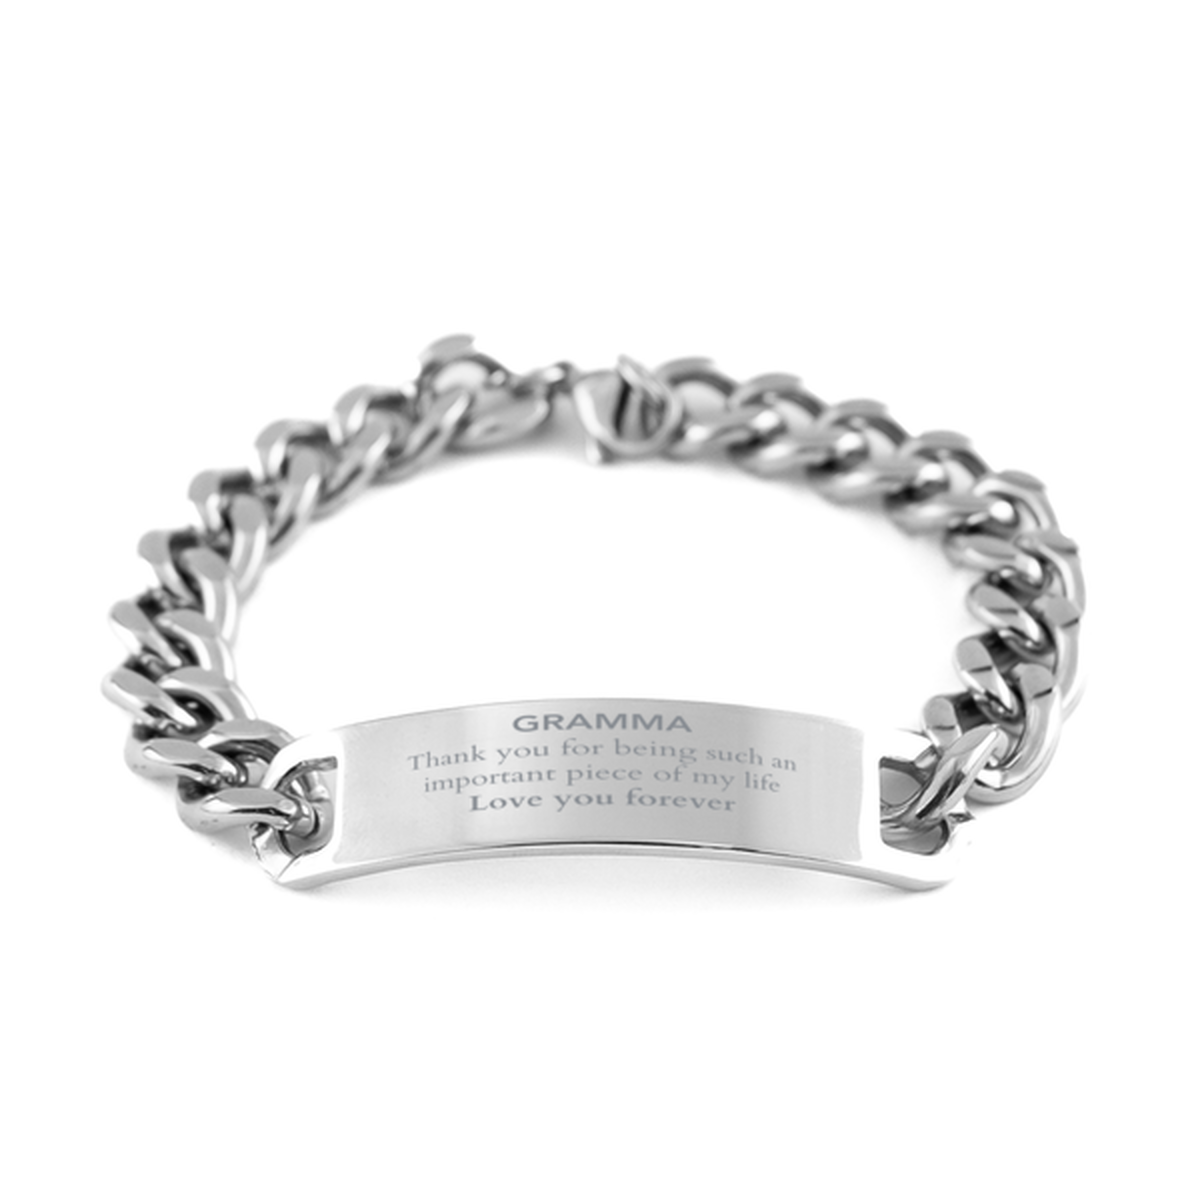 Appropriate Gramma Cuban Chain Stainless Steel Bracelet Epic Birthday Gifts for Gramma Thank you for being such an important piece of my life Gramma Christmas Mothers Fathers Day